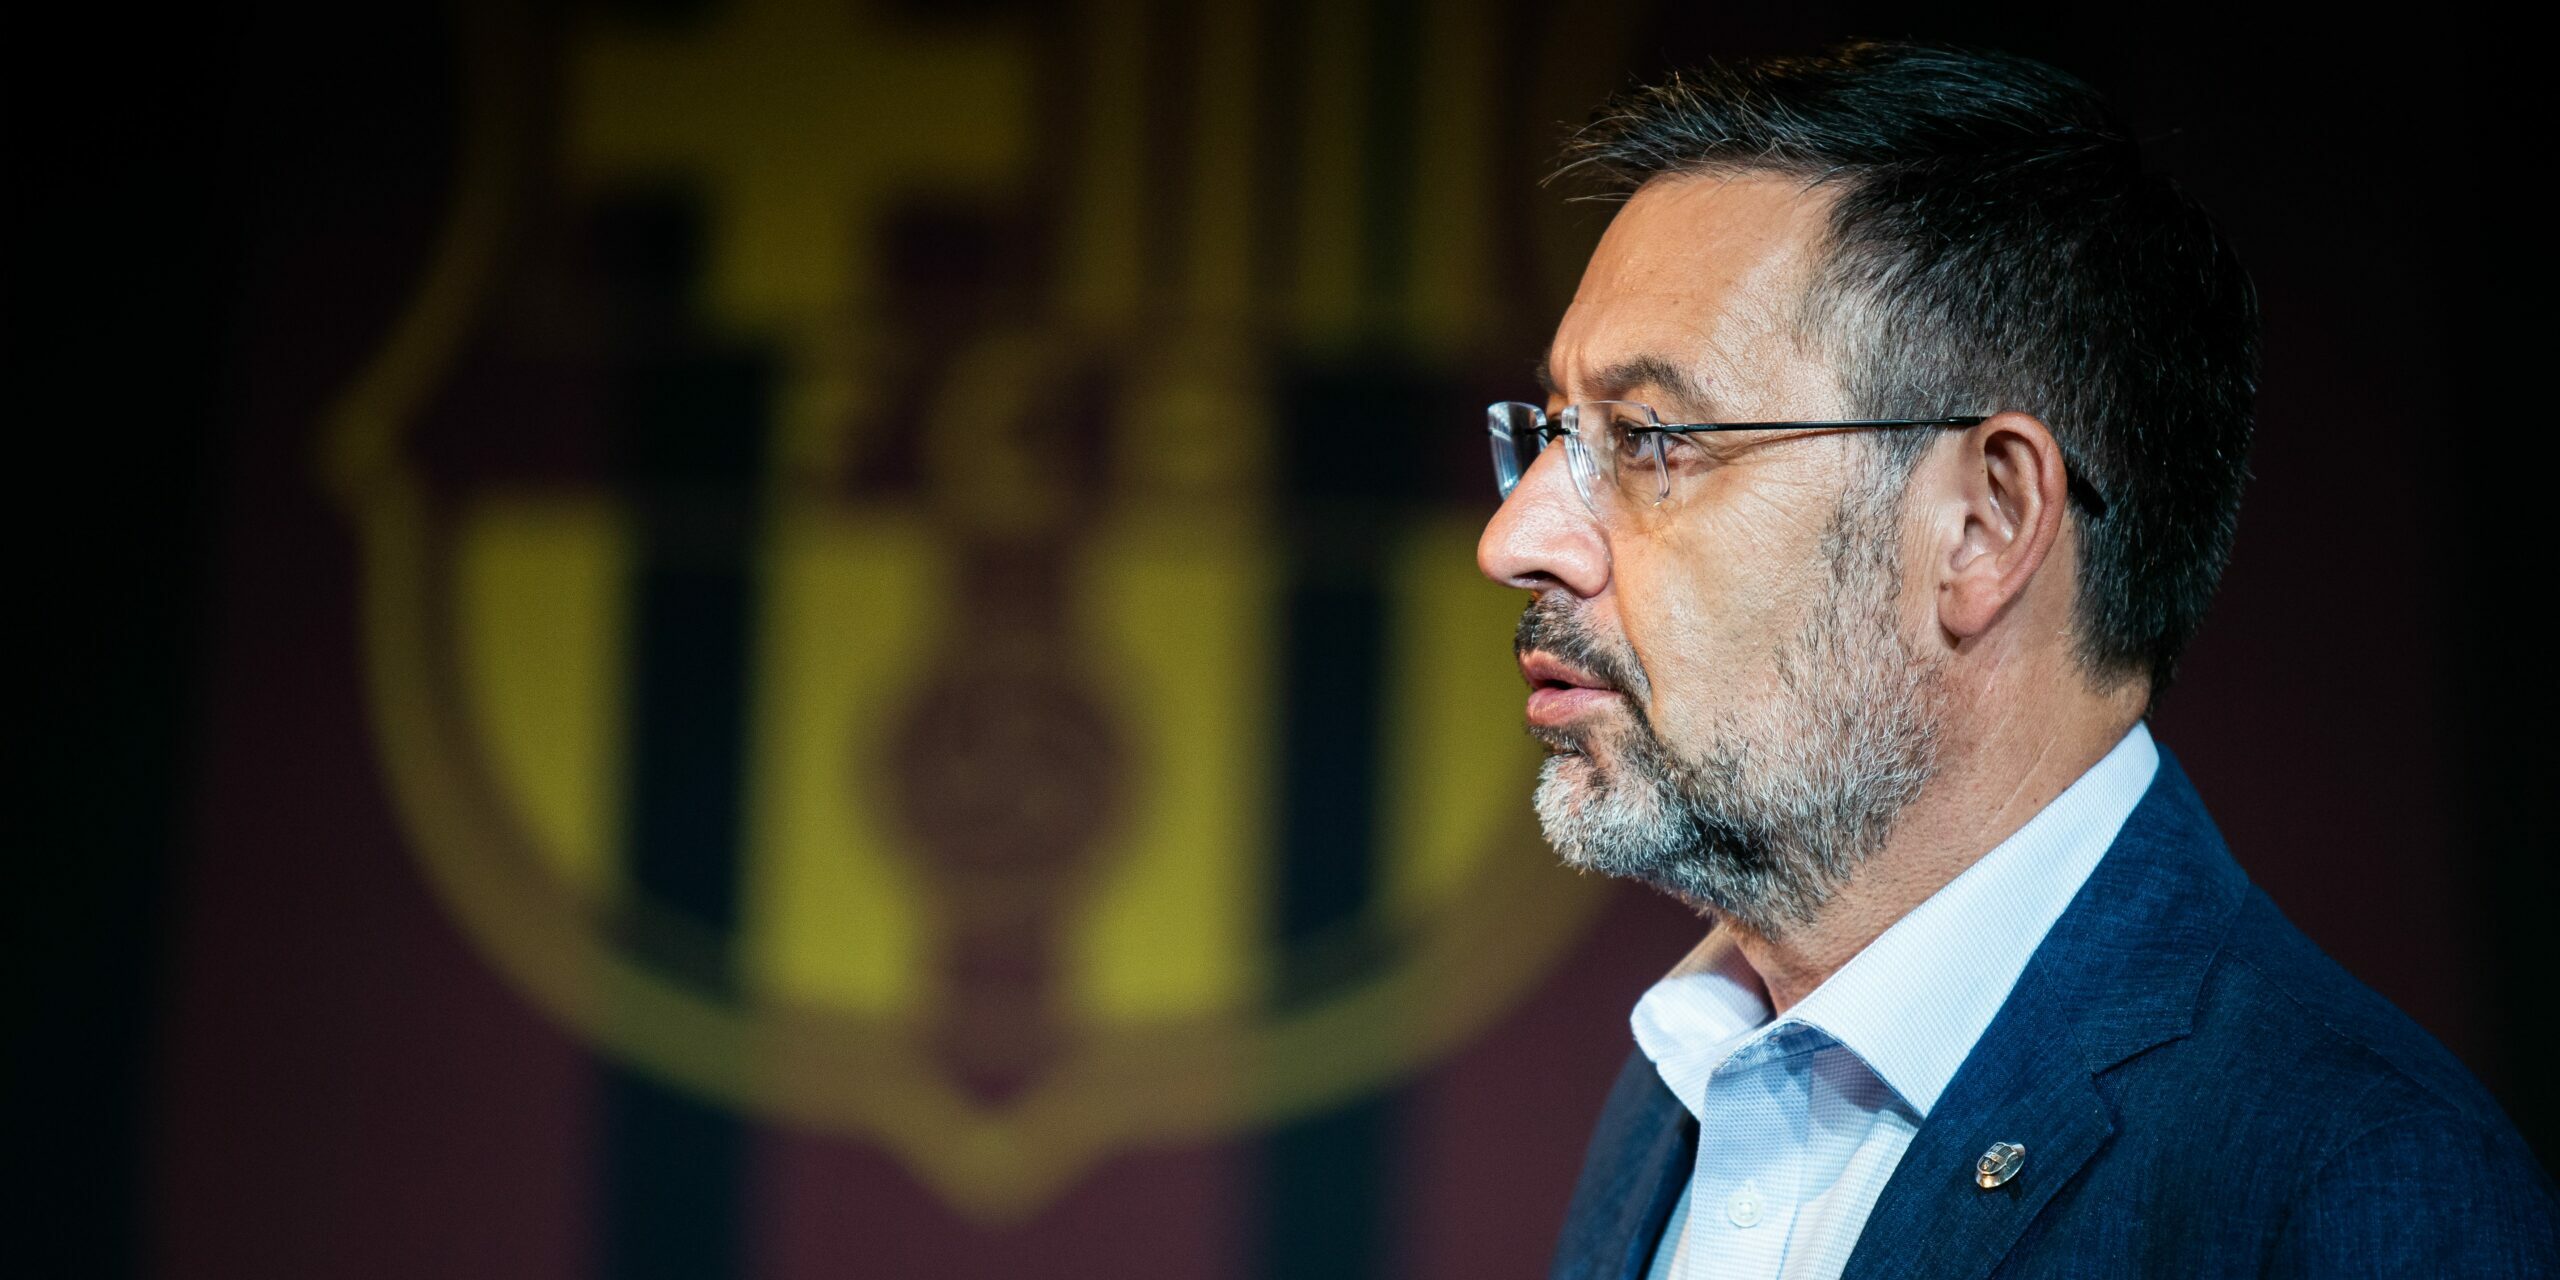 Controversial former Barcelona President to hold press conference to explain tenure “truths”